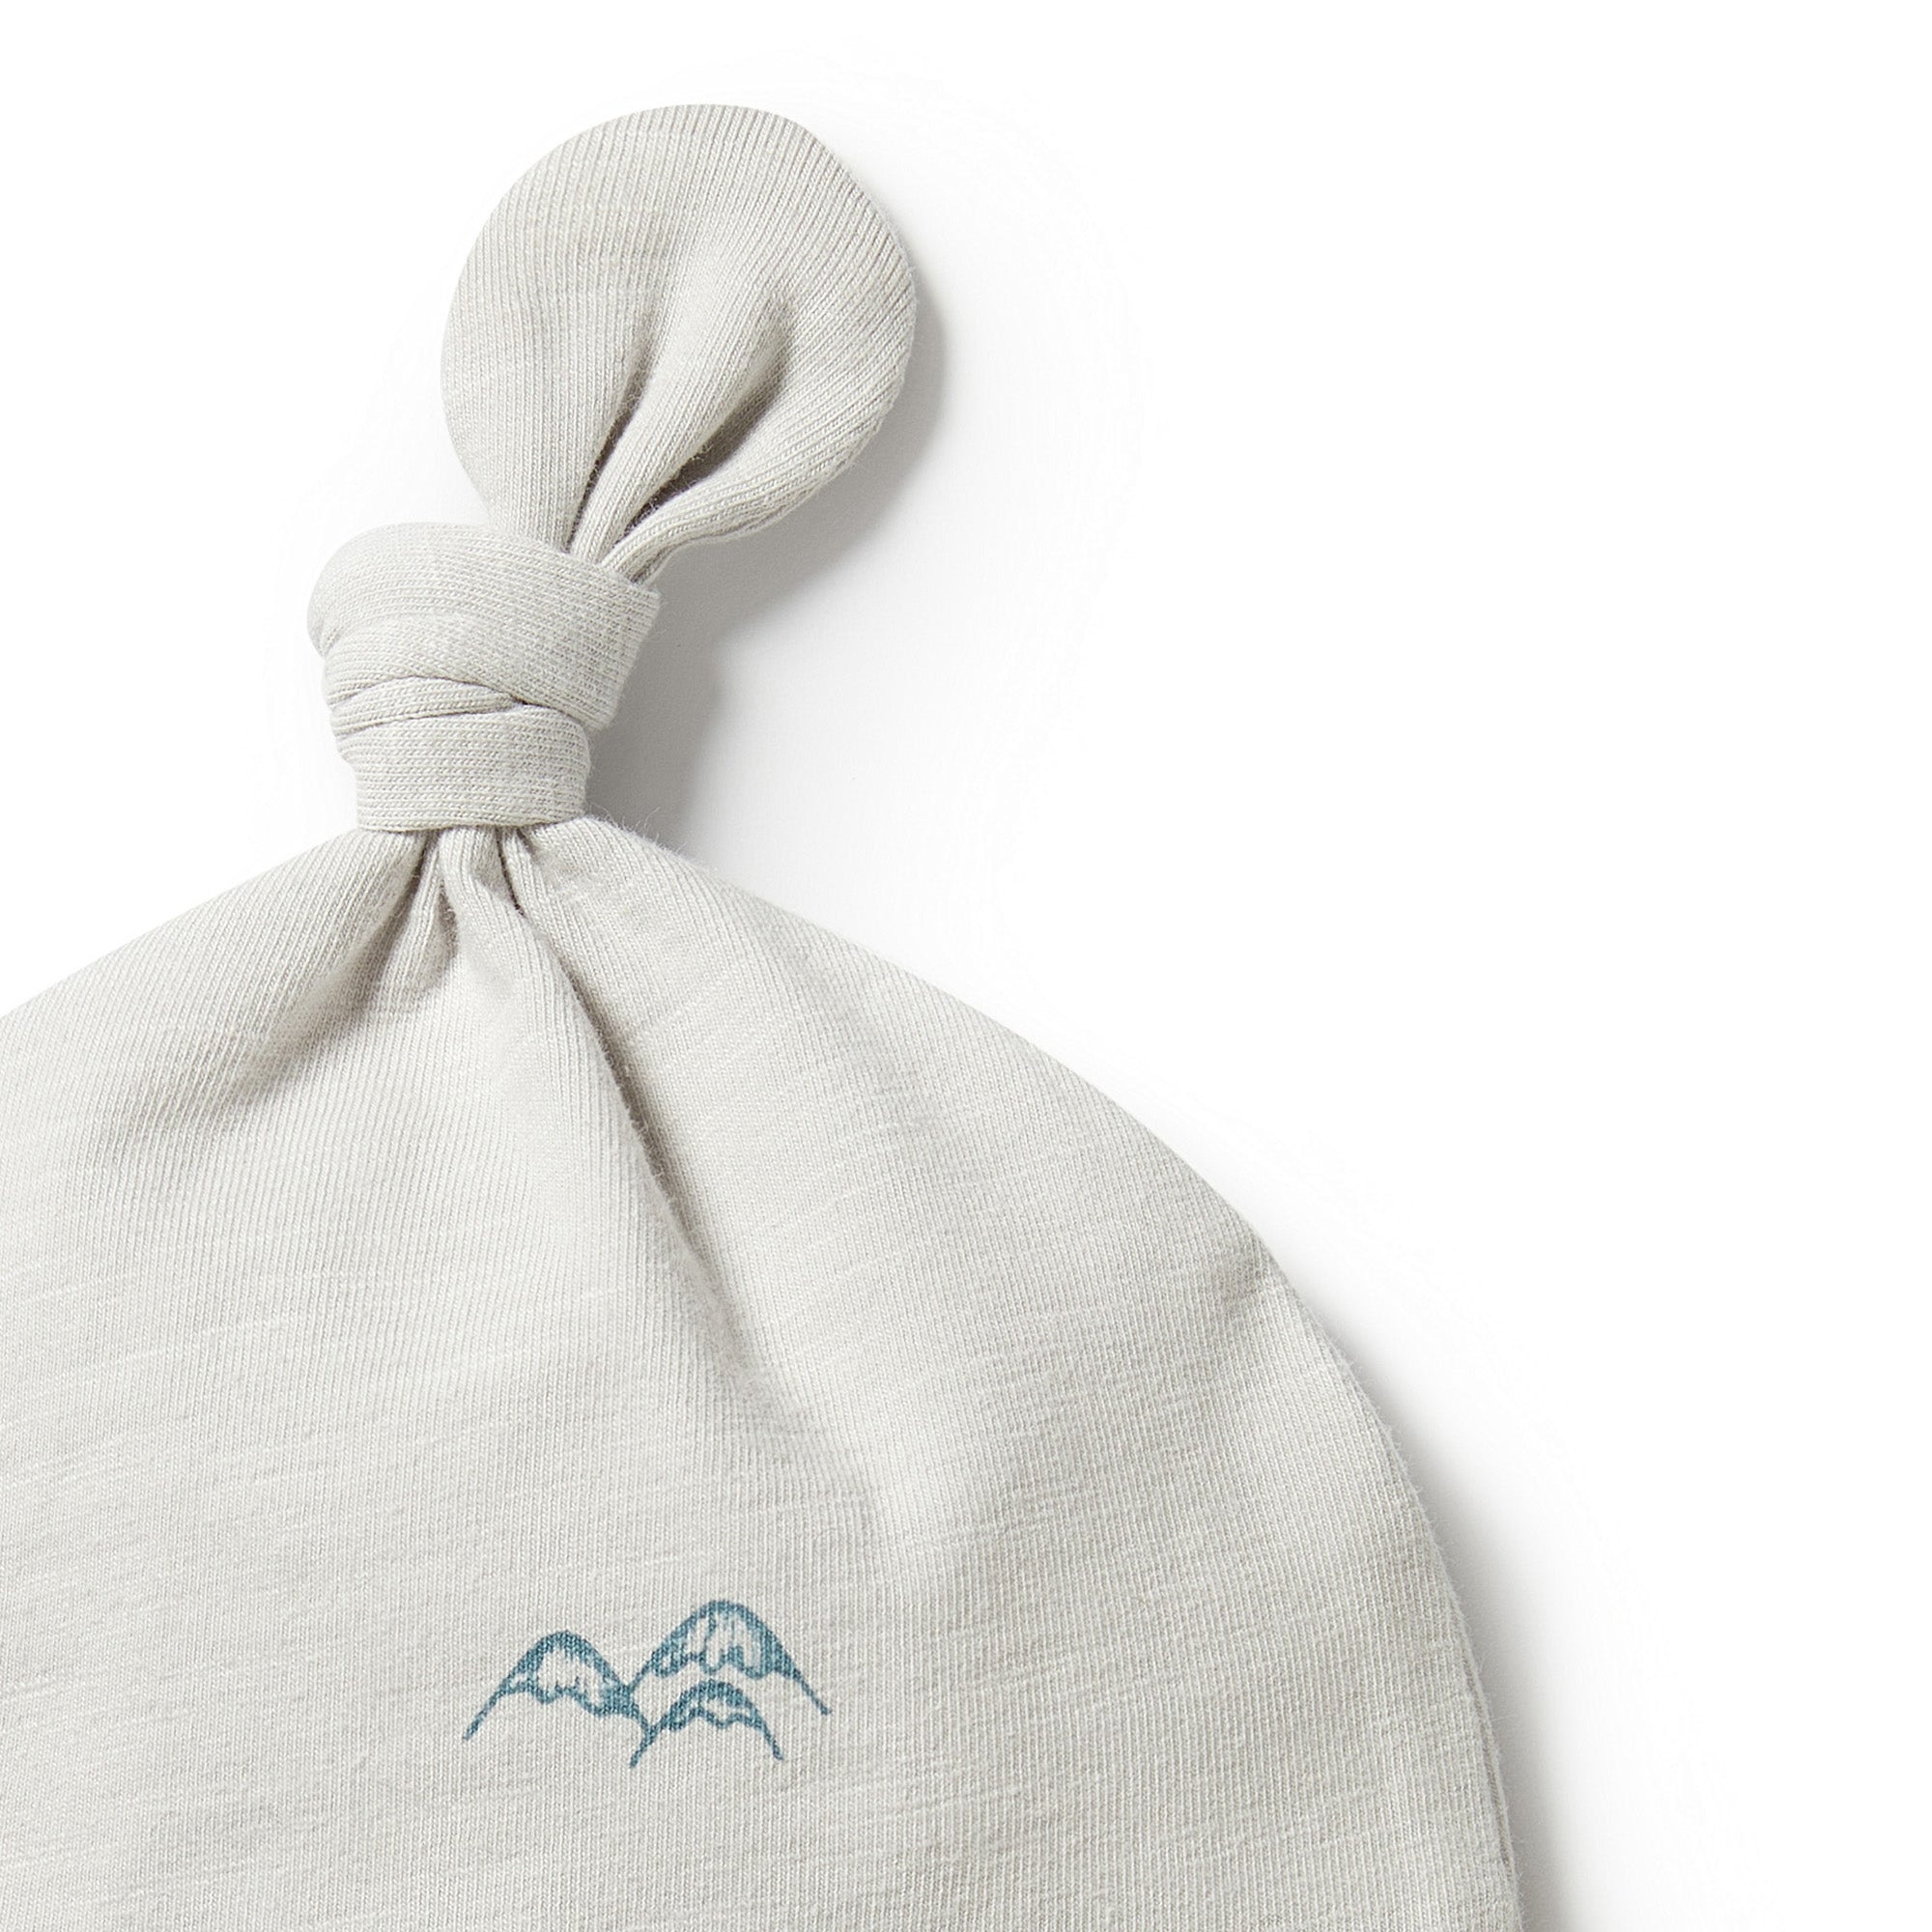 Wilson & Frenchy - Organic Knot Hat - Mountain Top